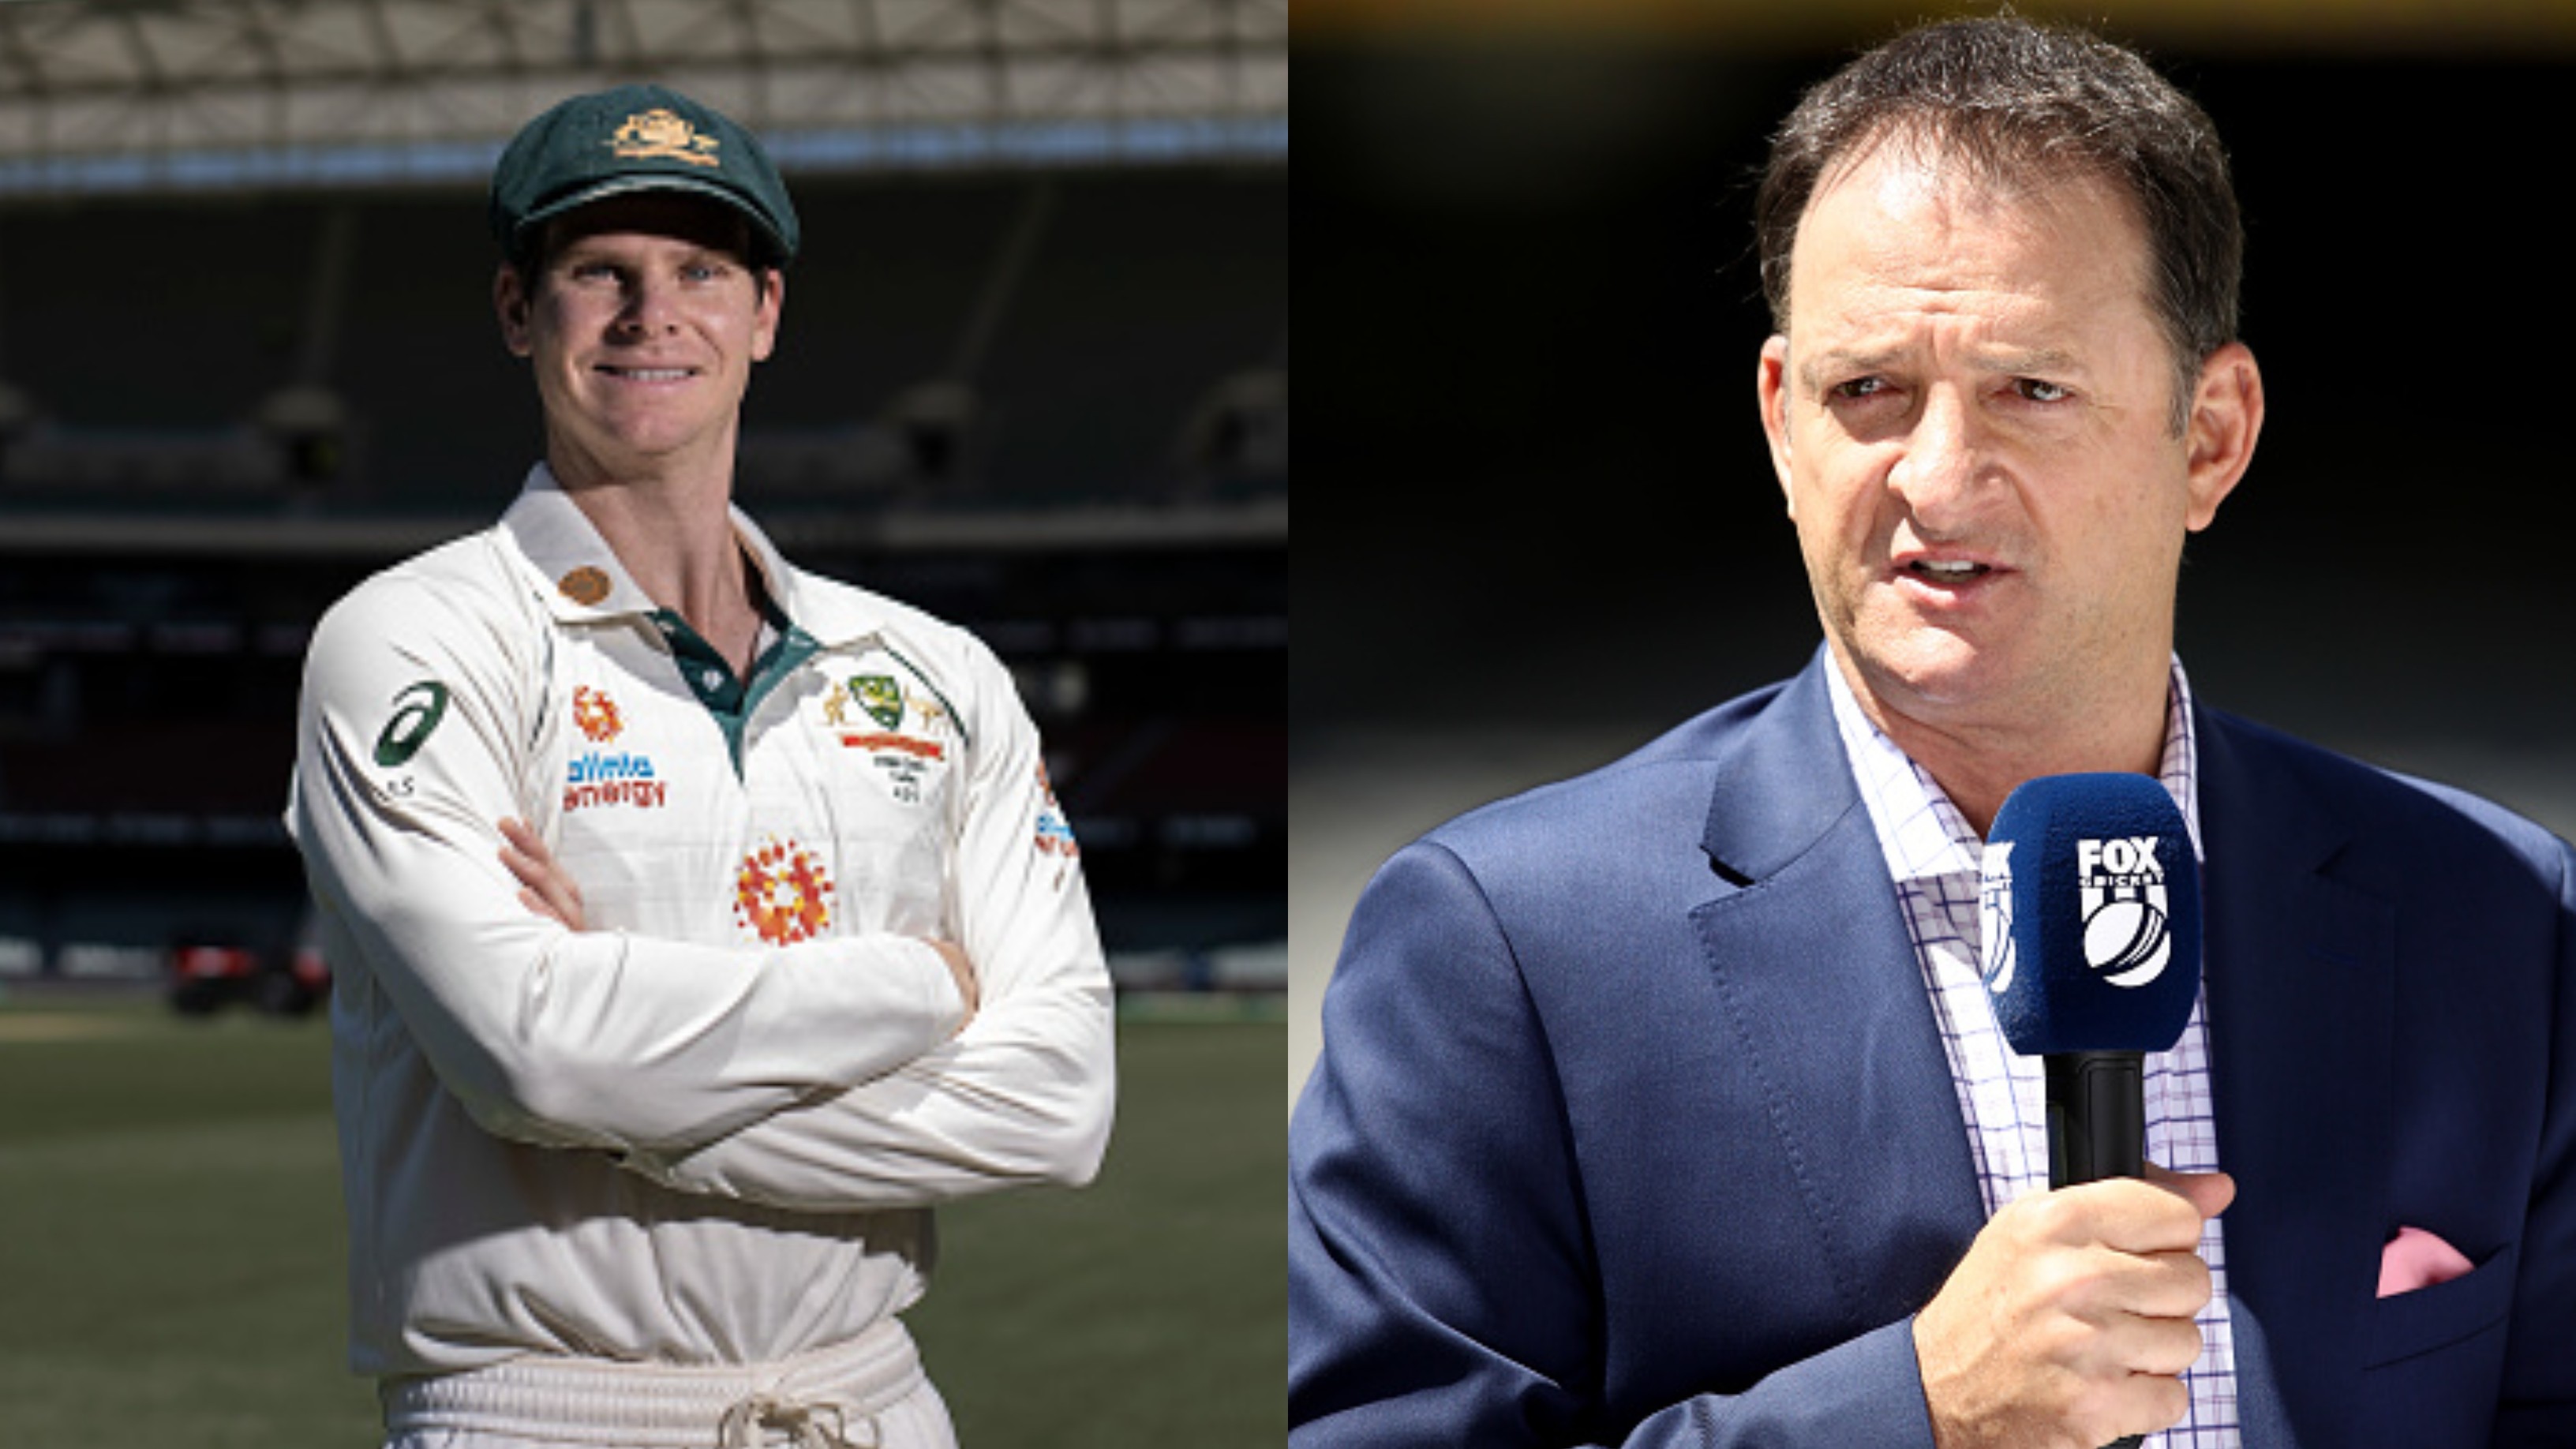 Steve Smith has paid his penance and should be handed Australia captaincy, says Mark Waugh 